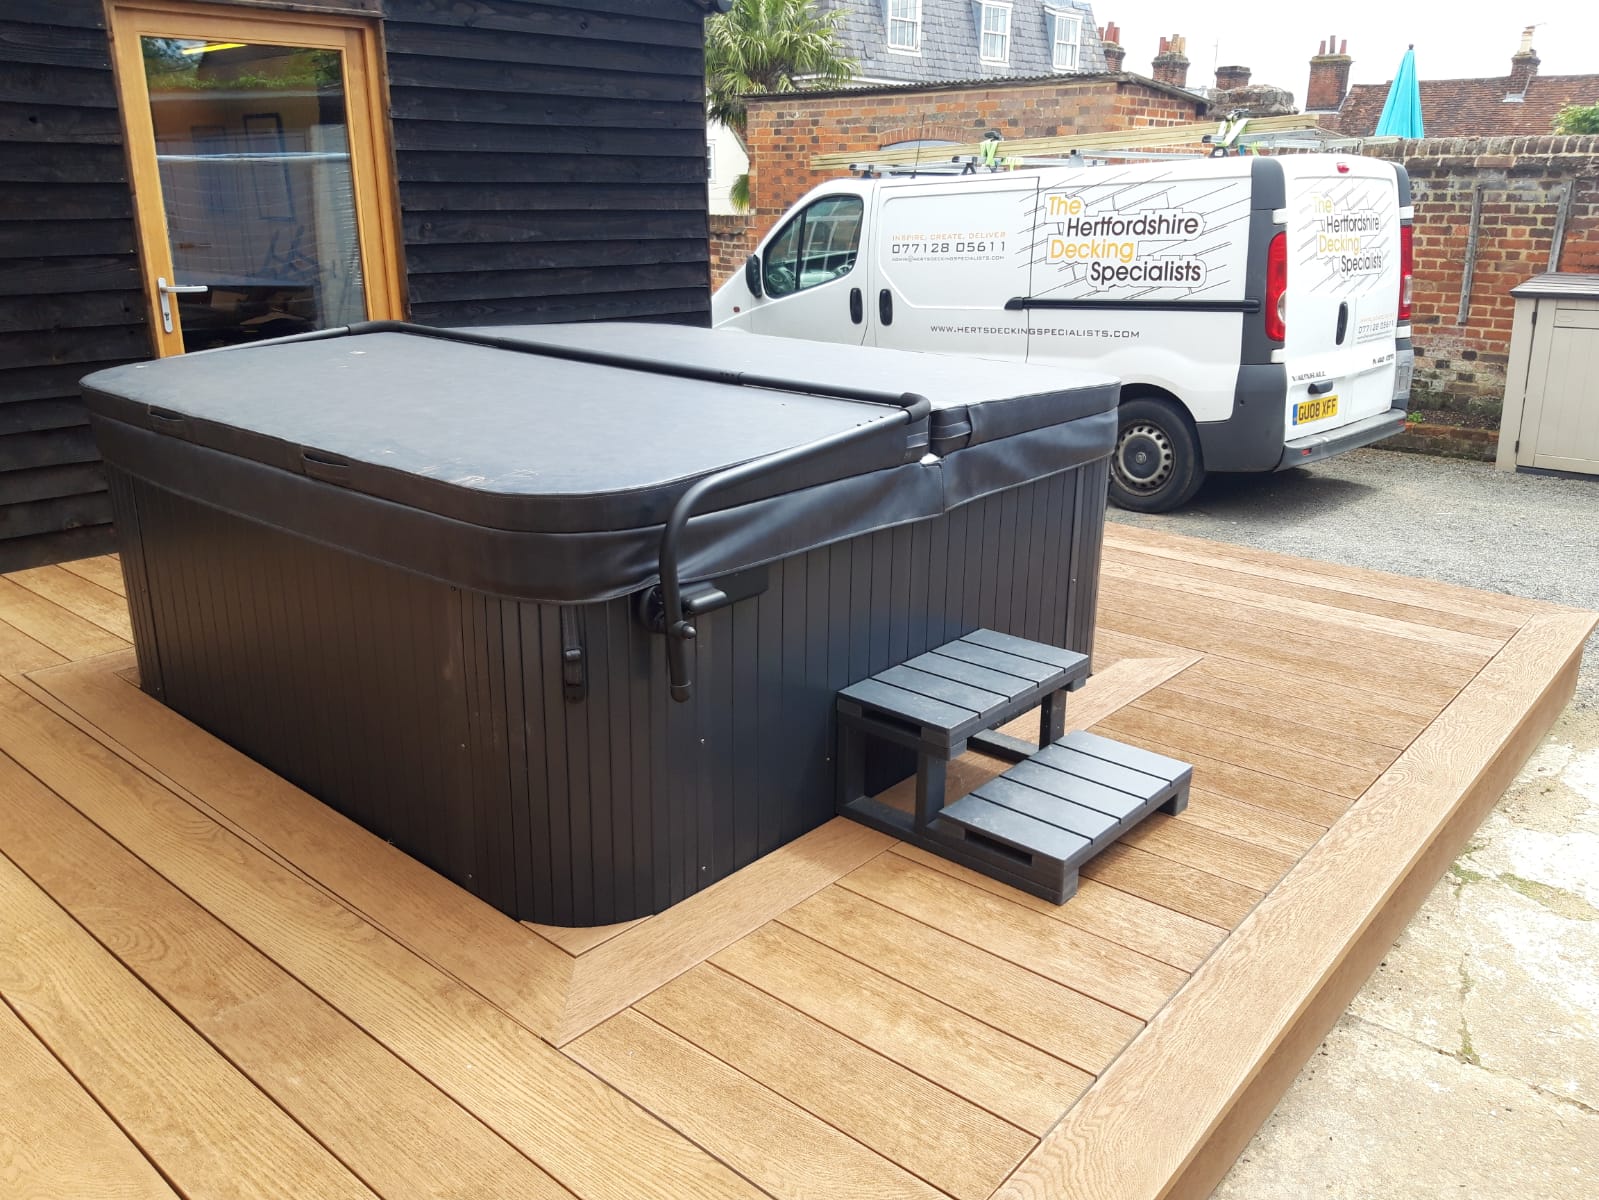 Hot-tub with Millboard surround.